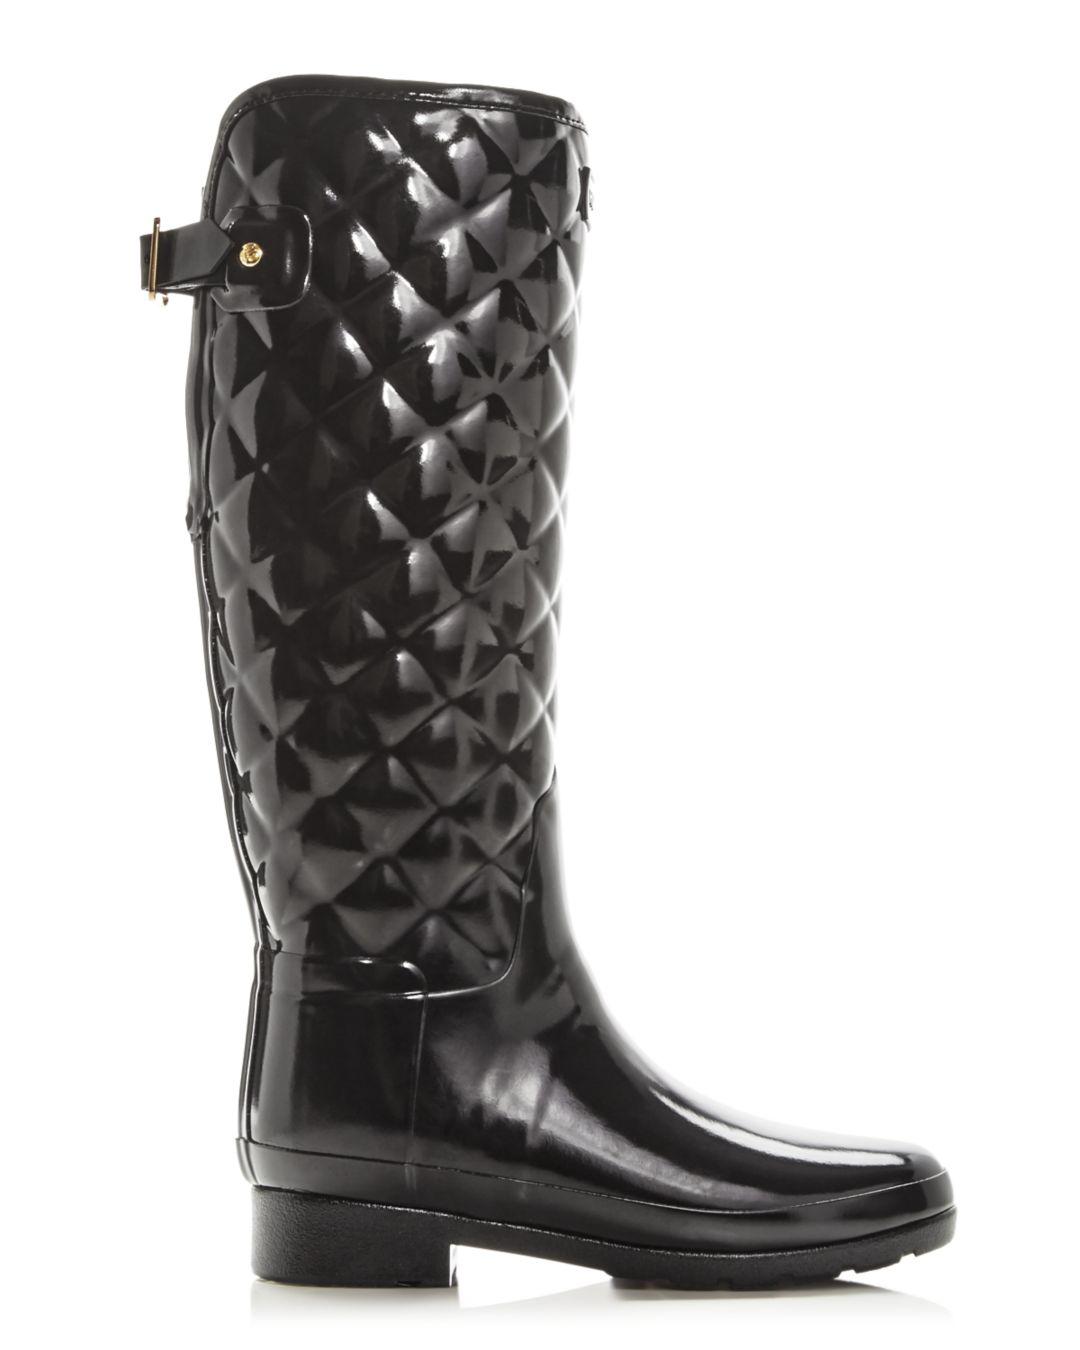 Lyst - HUNTER Women's Refined Gloss Quilted Rain Boots in Black